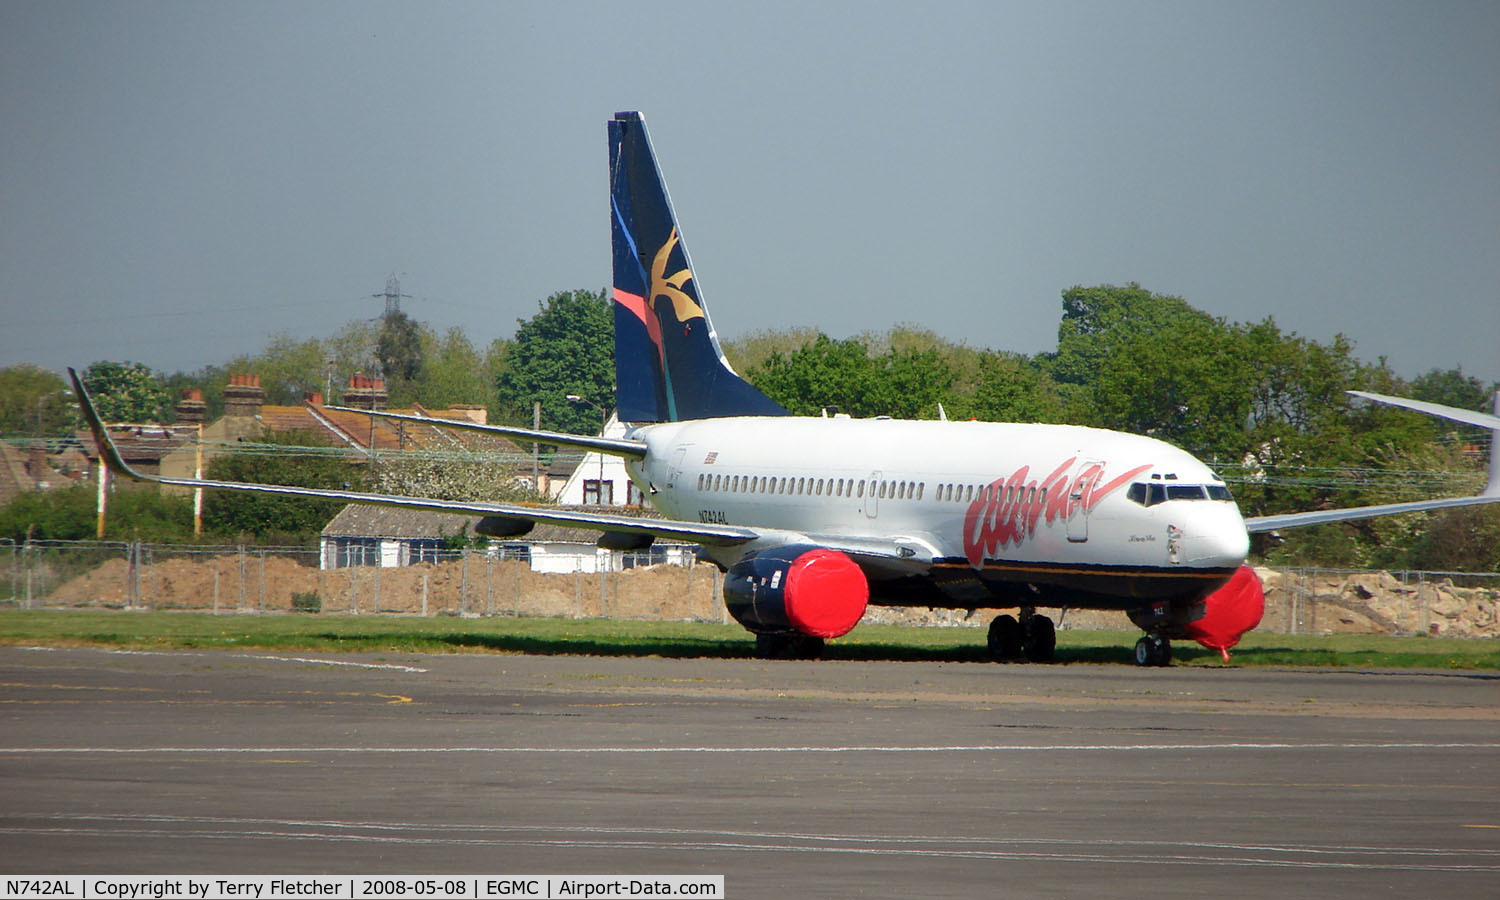 N742AL, 2001 Boeing 737-76N C/N 30830, One of the three ex Aloha aircraft stored at Southend